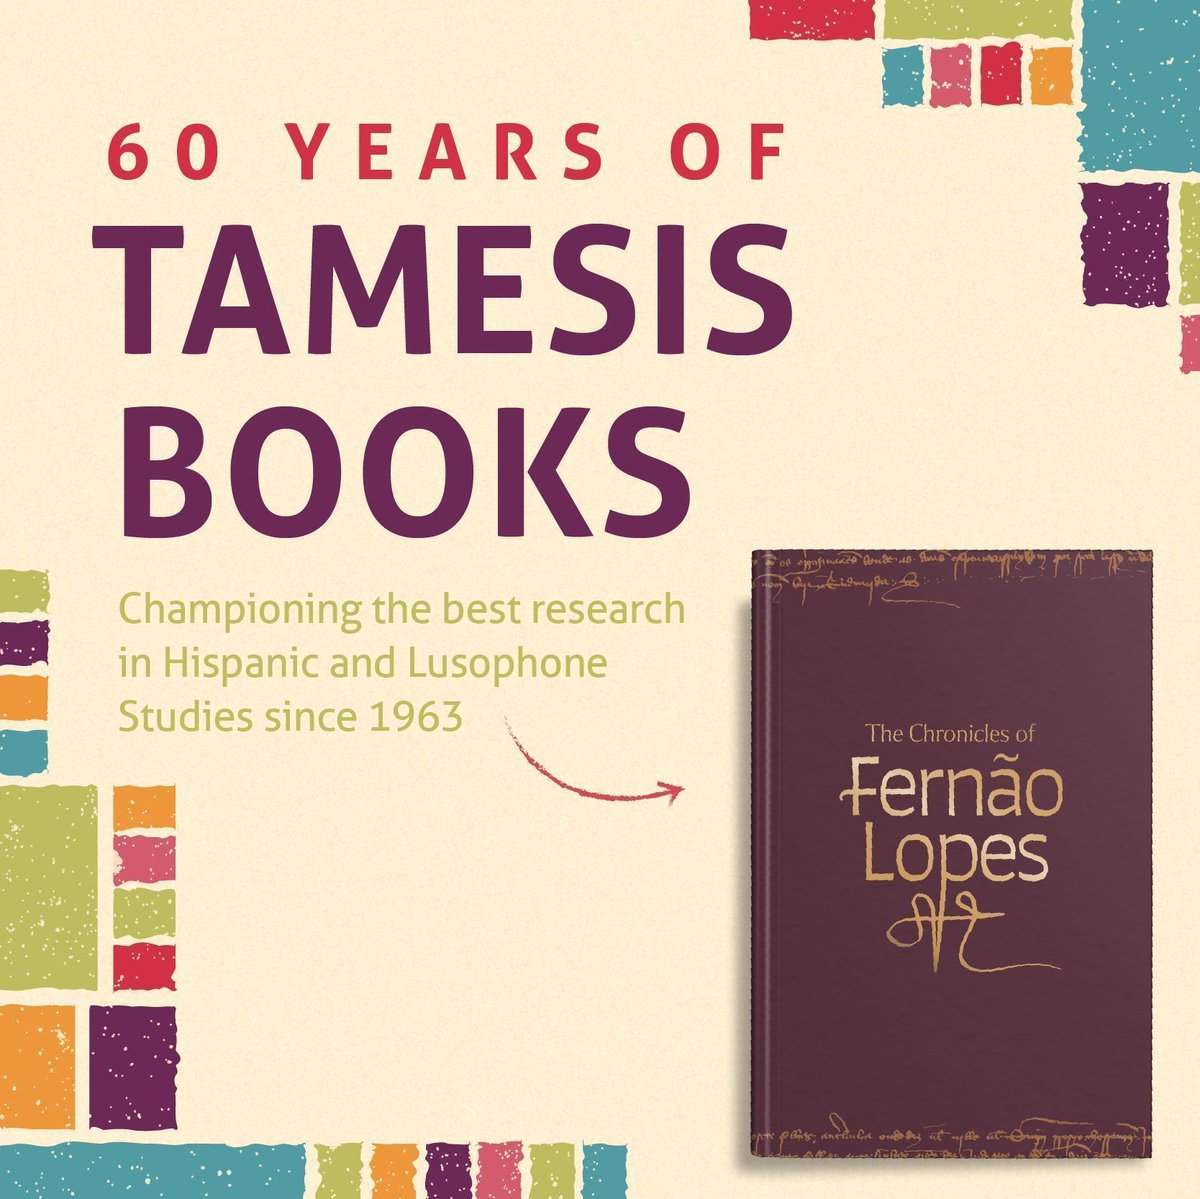 The first 5-volume set English translation of the chronicles of Fernão Lopes, the father of #Portuguese historiography, a major source for the study of #medieval European history. boybrew.co/3soQD4l #Tamesis #TamesisBooks #HispanicStudies #MedievalHistory #Translation